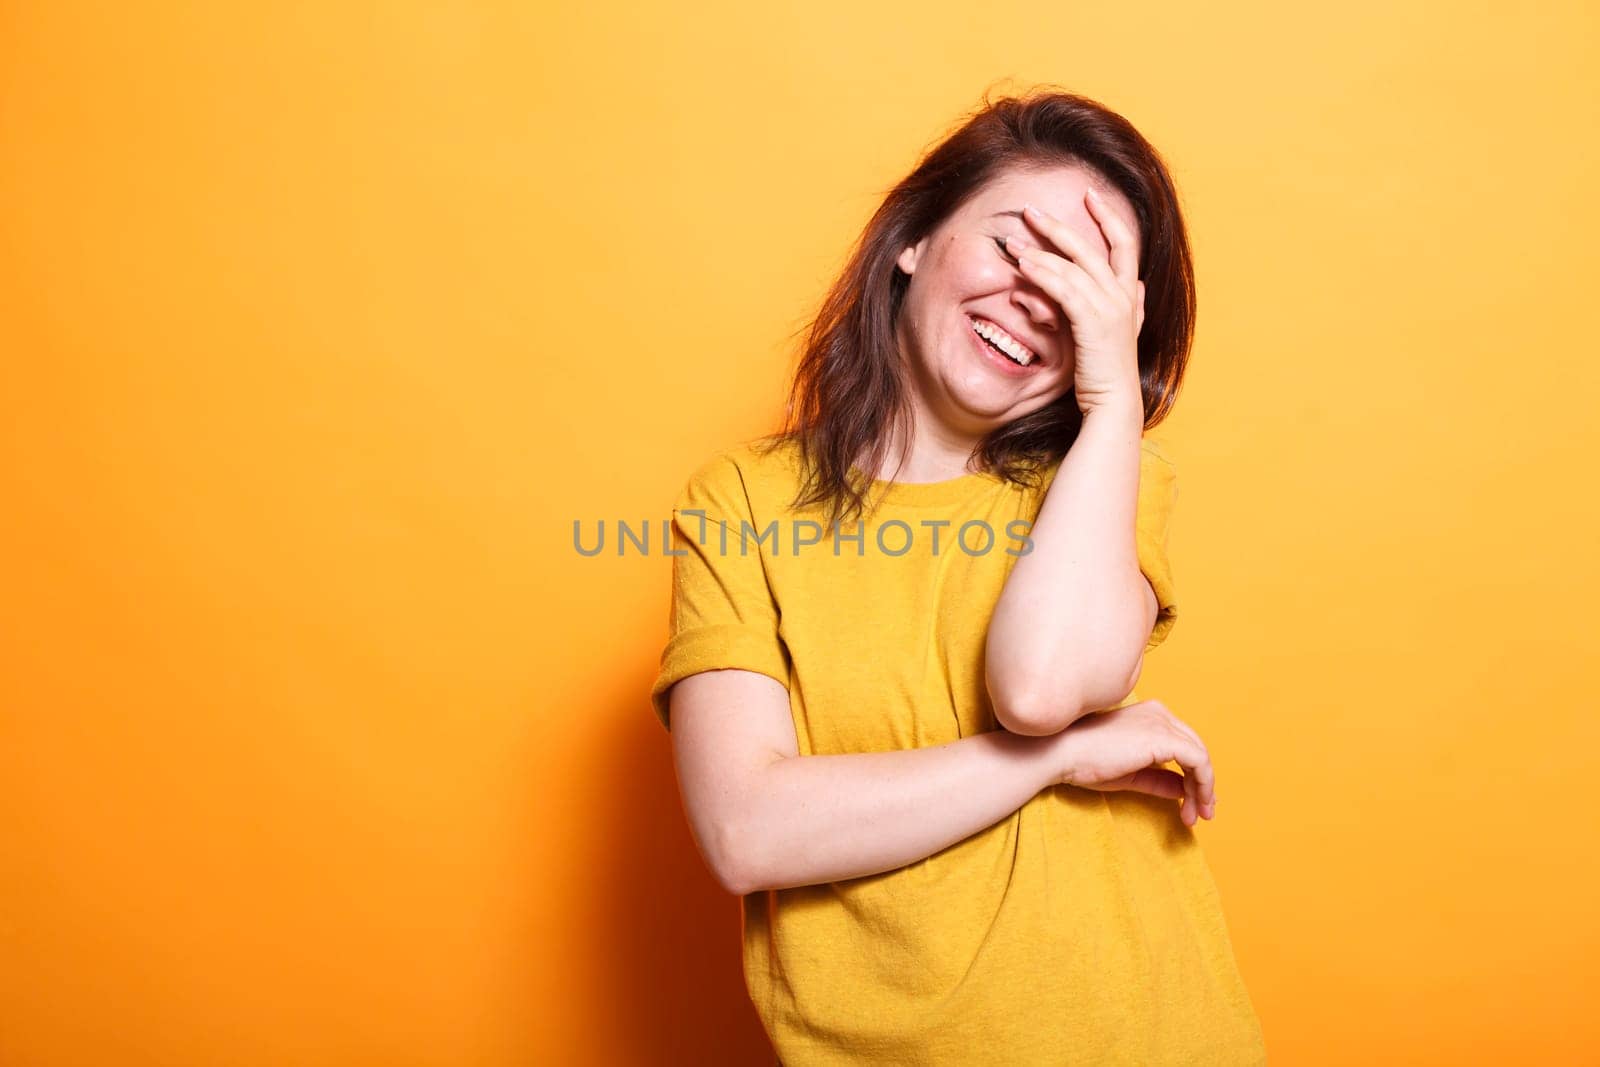 Portrait of beautiful brunette woman laughing while covering eyes and face. Enthusiastic lady using hand to hide from camera, feeling shy and happy standing over isolated background.